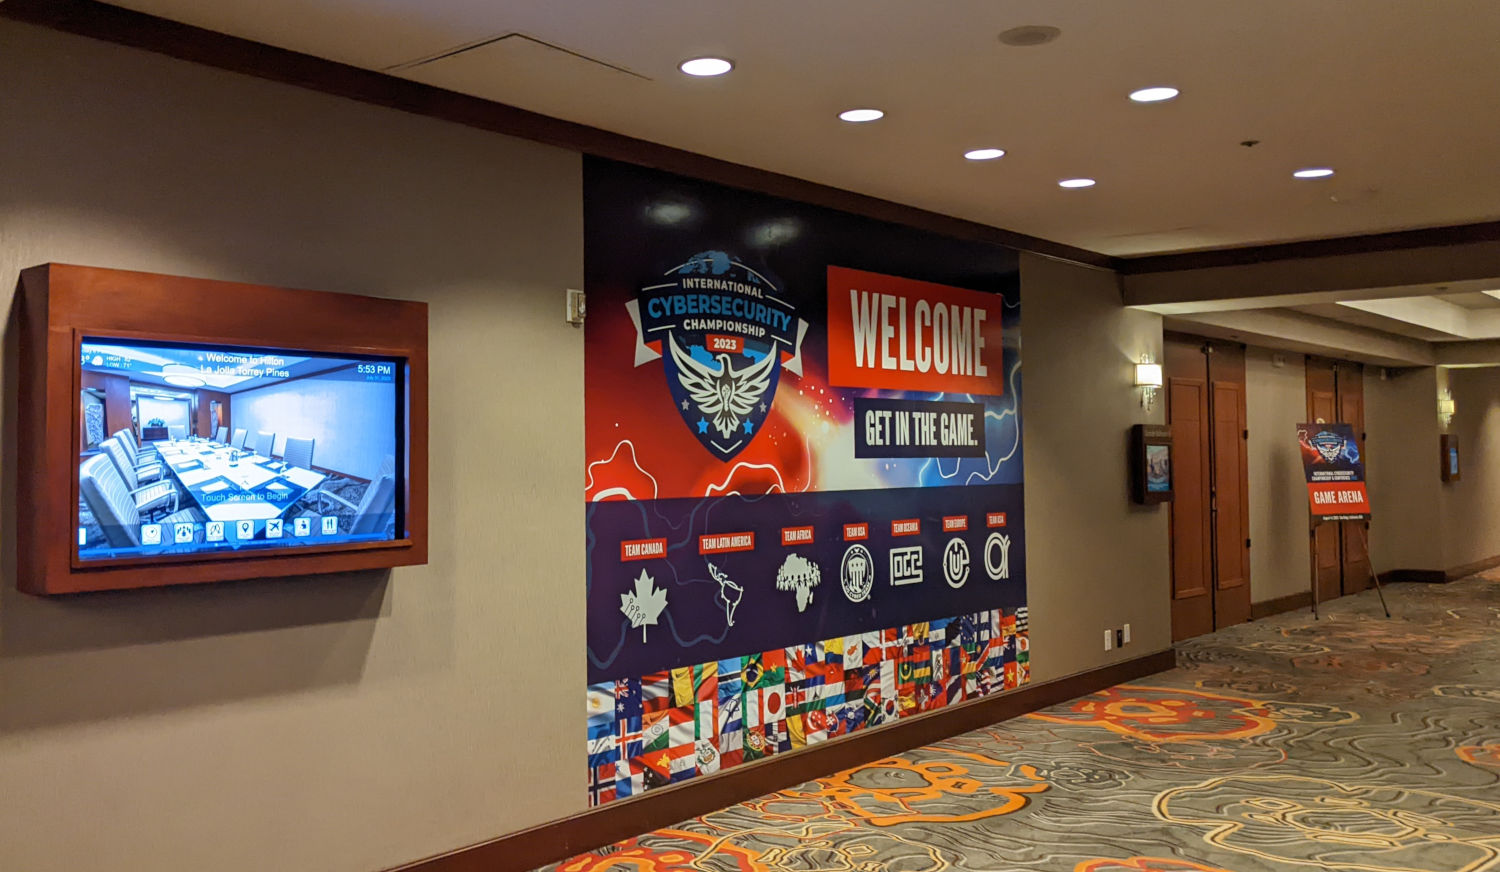 Large poster with ICC 2023 logo and text saying 'WELCOME' and 'GET IN THE GAME.'